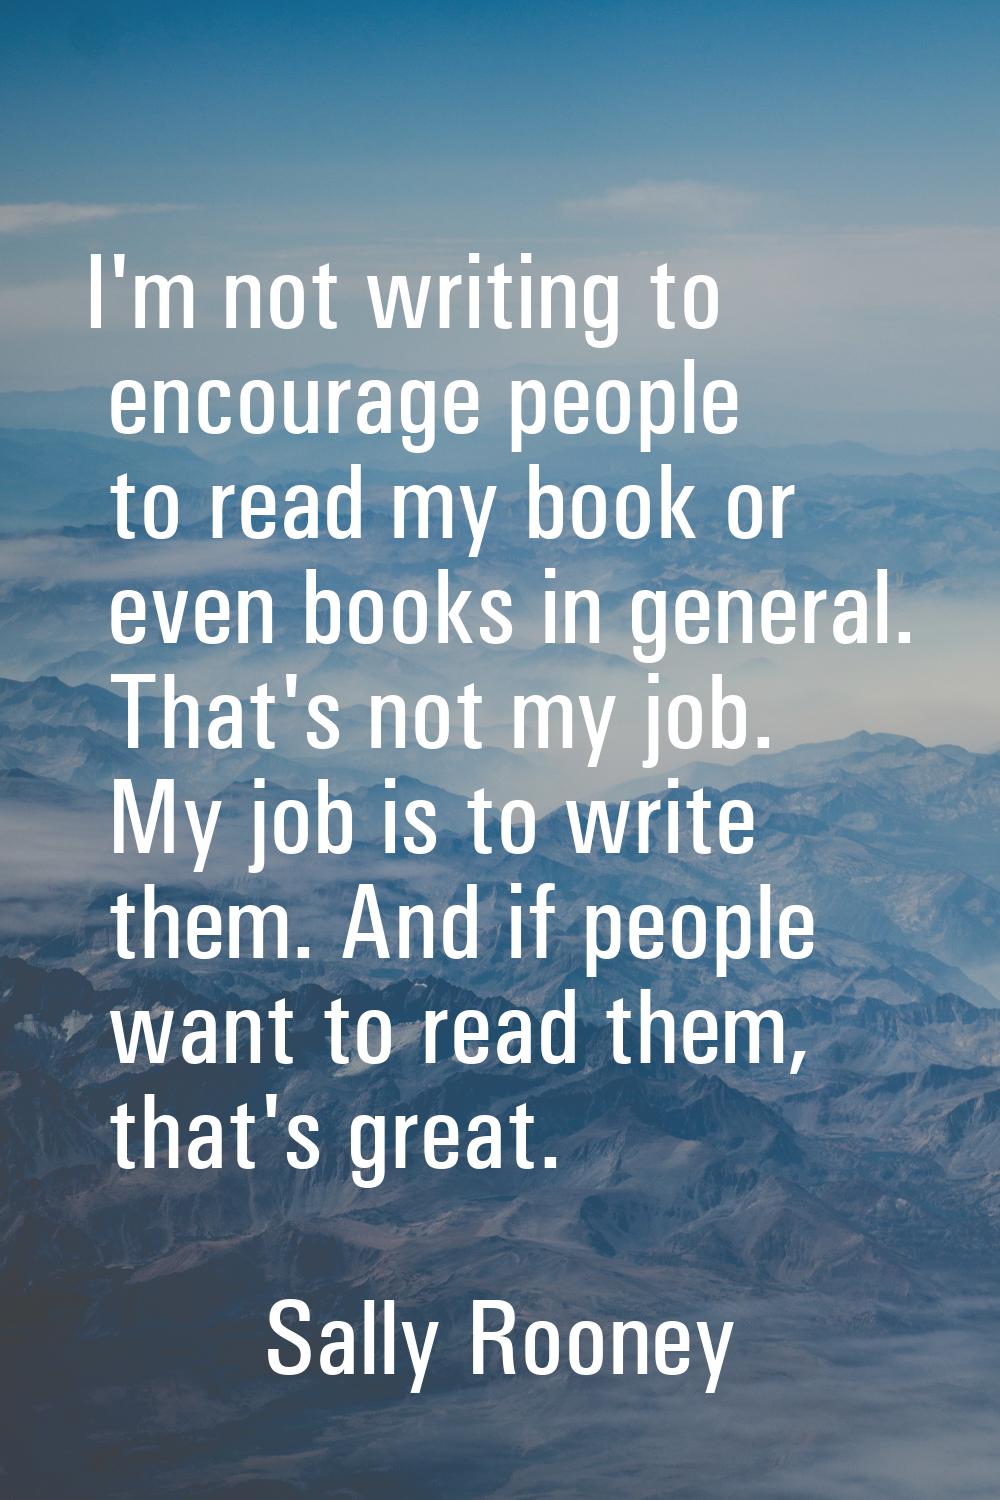 I'm not writing to encourage people to read my book or even books in general. That's not my job. My